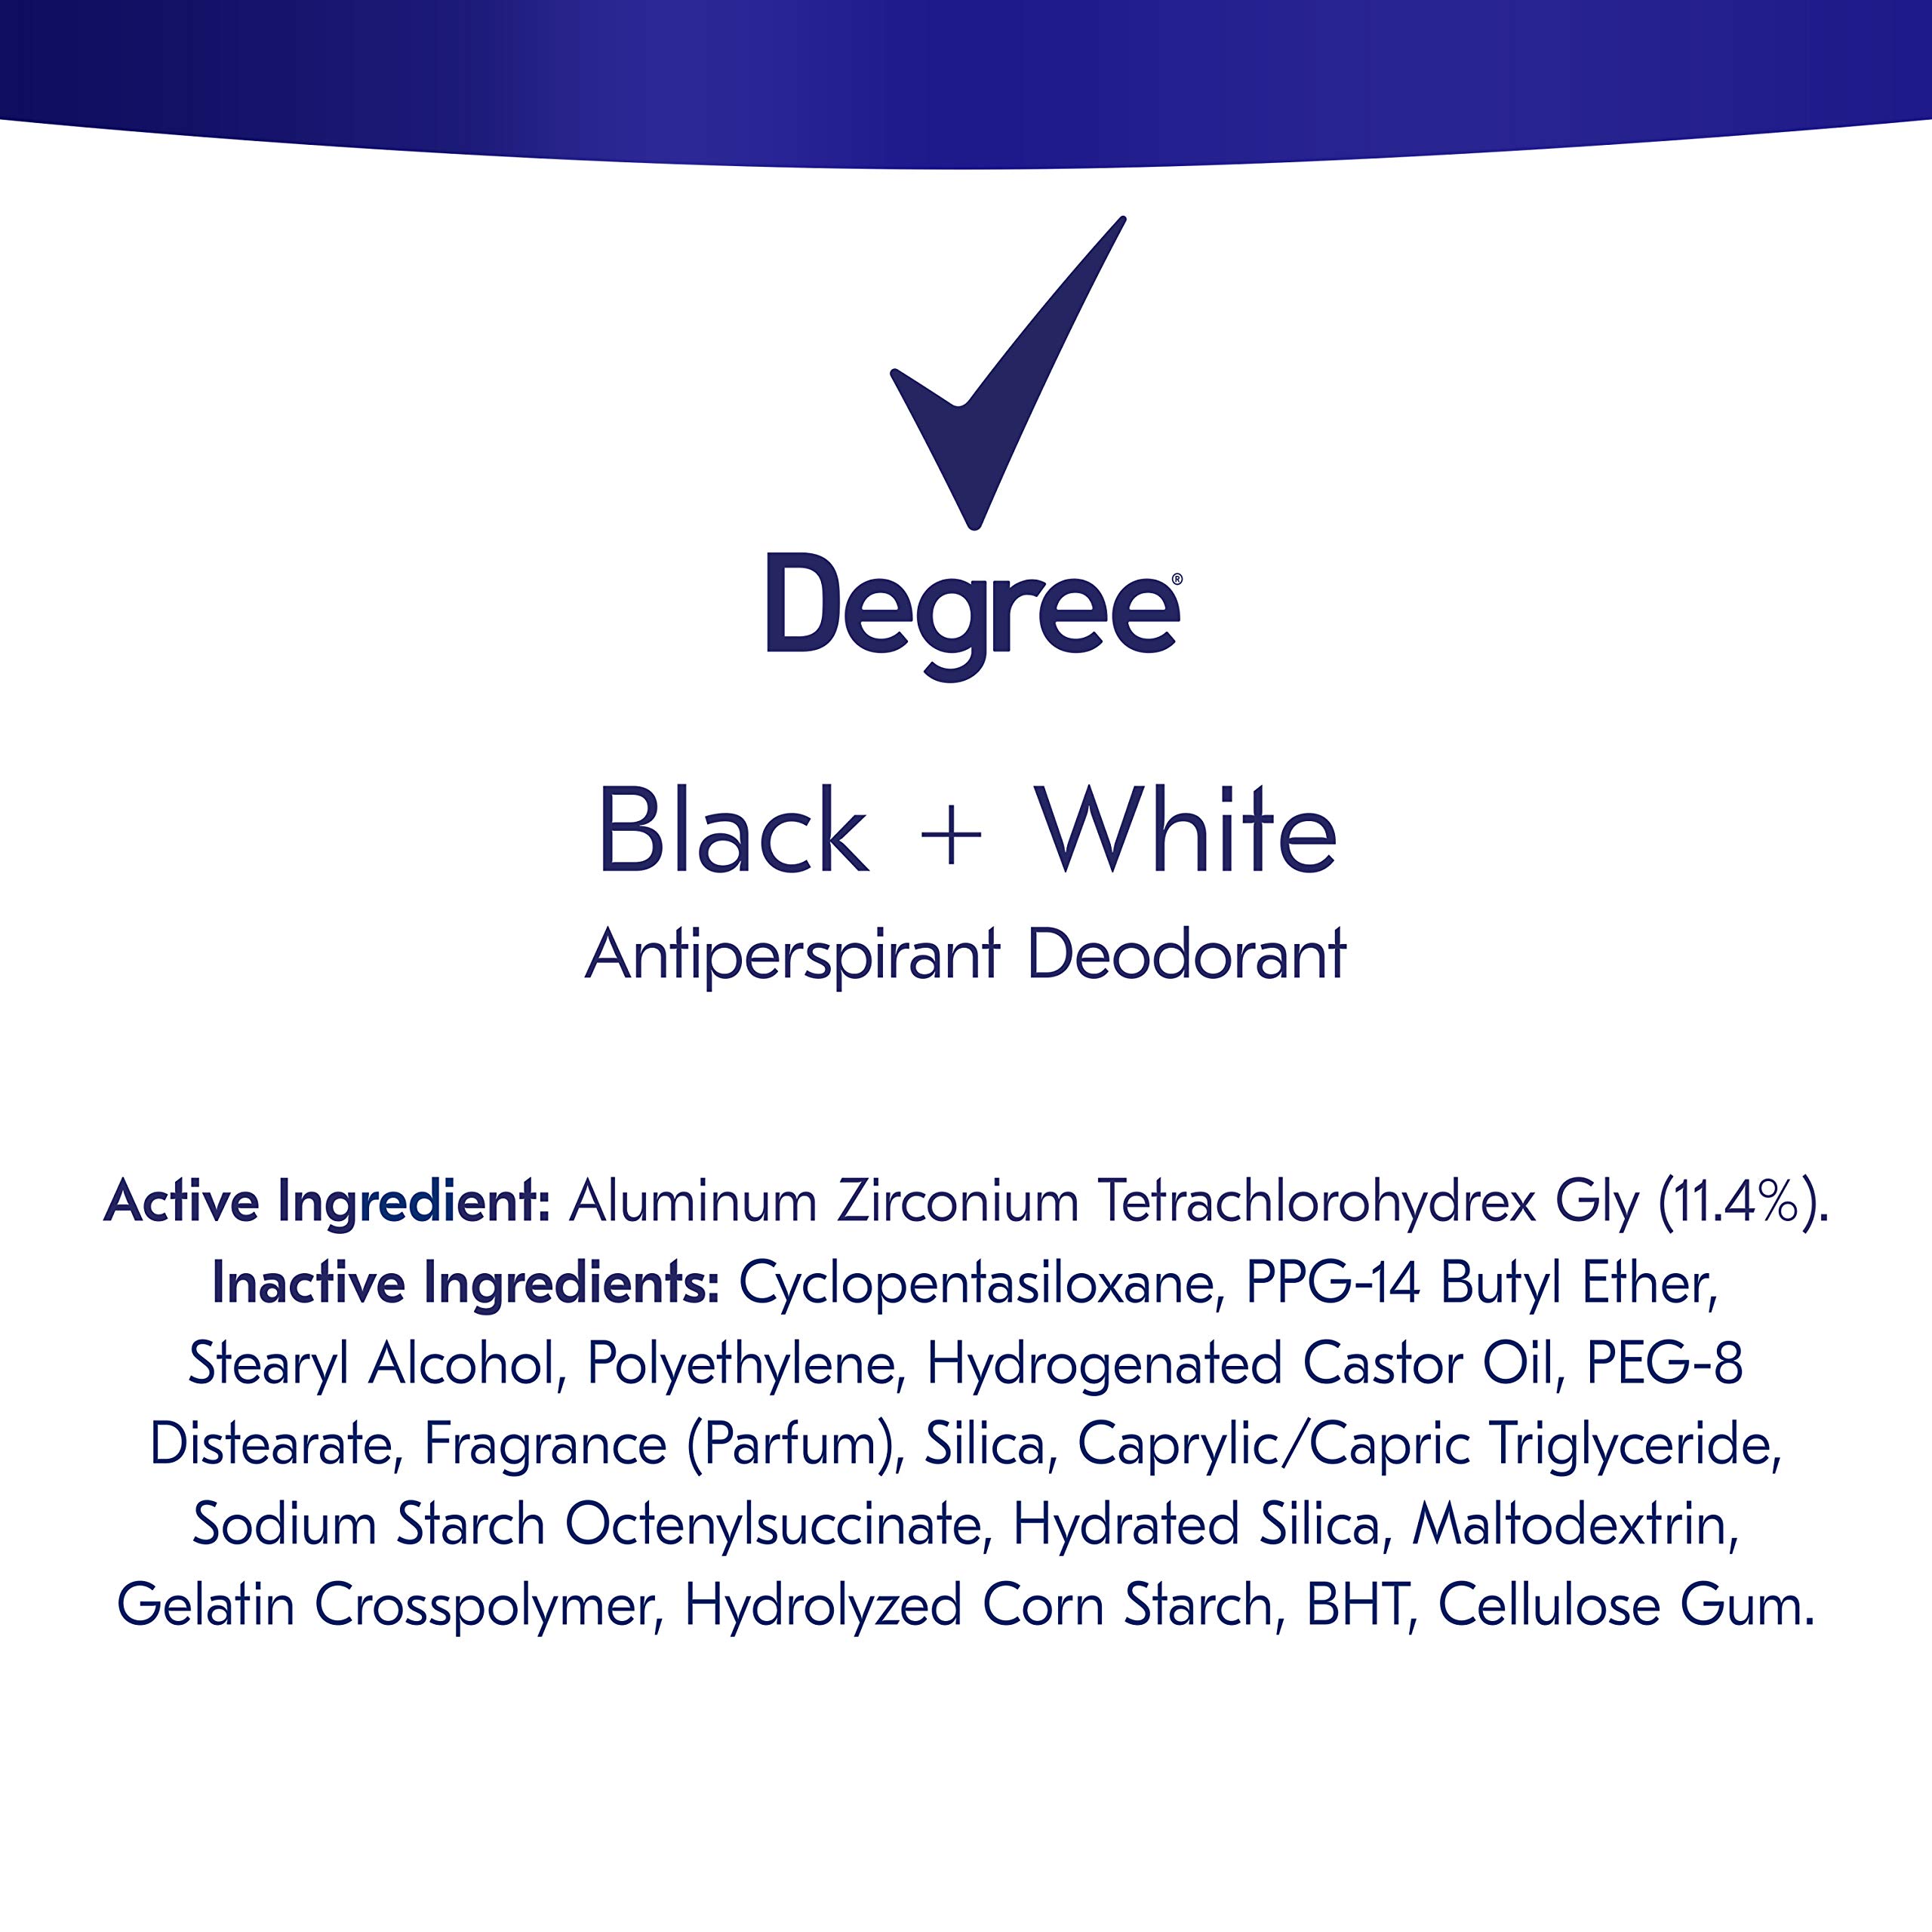 Degree UltraClear Antiperspirant for Women Protects from Deodorant Stains Black+White Deodorant for Women 2.6 Ounce (Pack of 4)